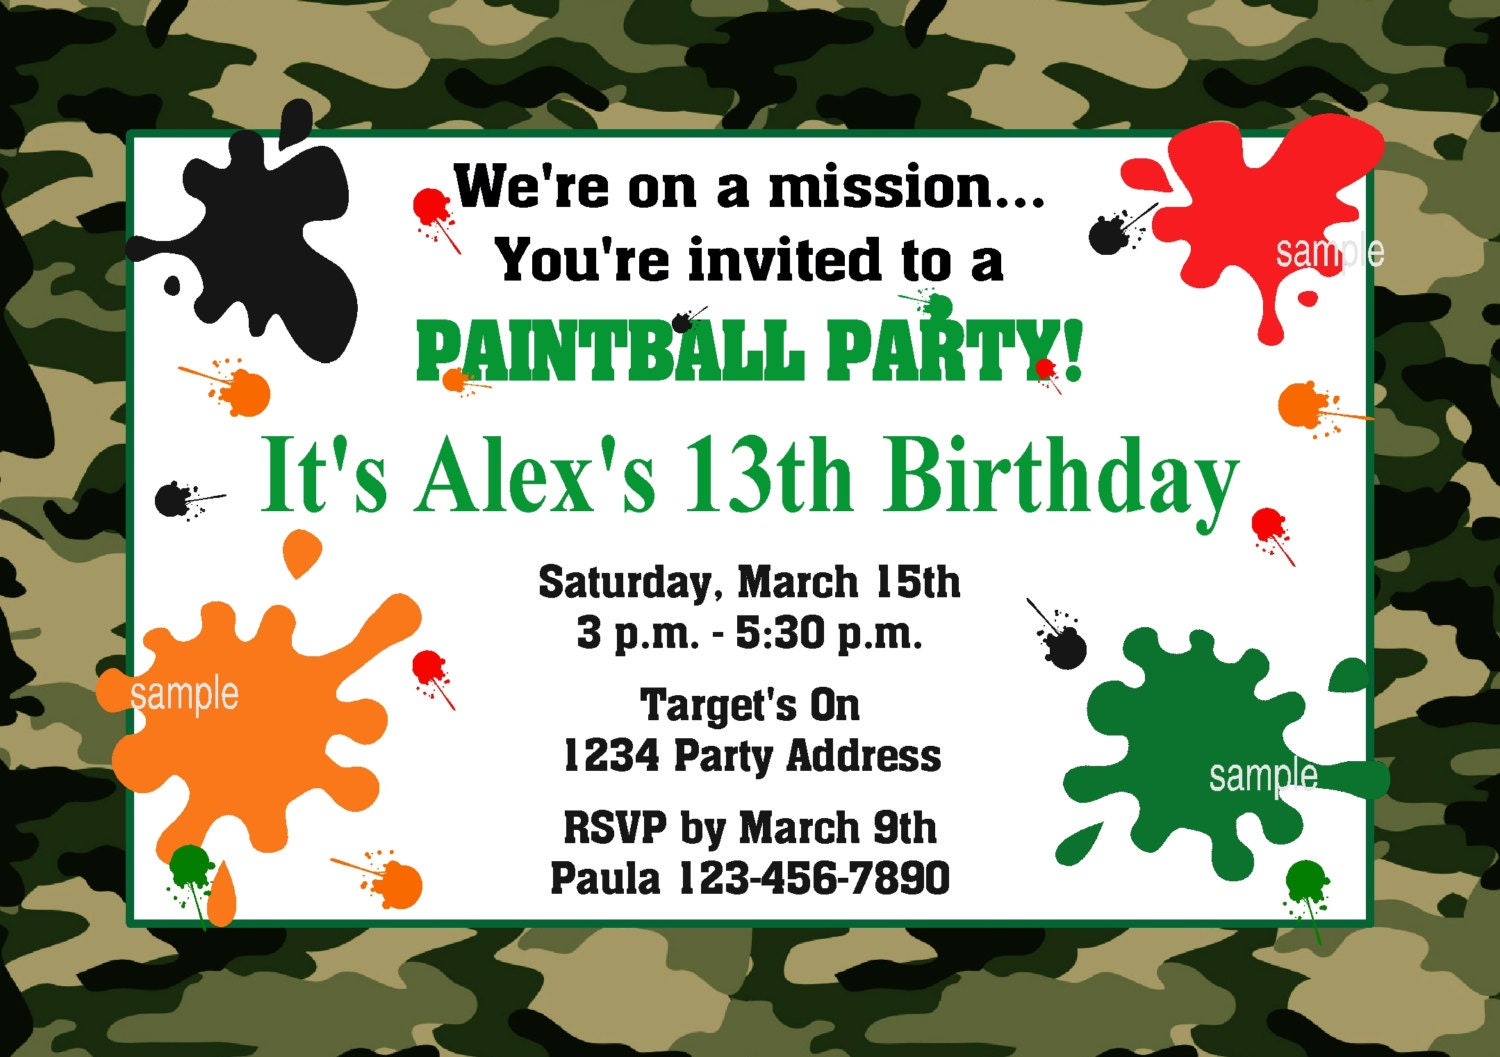 paintball-invitation-diy-printable-birthday-party-by-jcsaccents